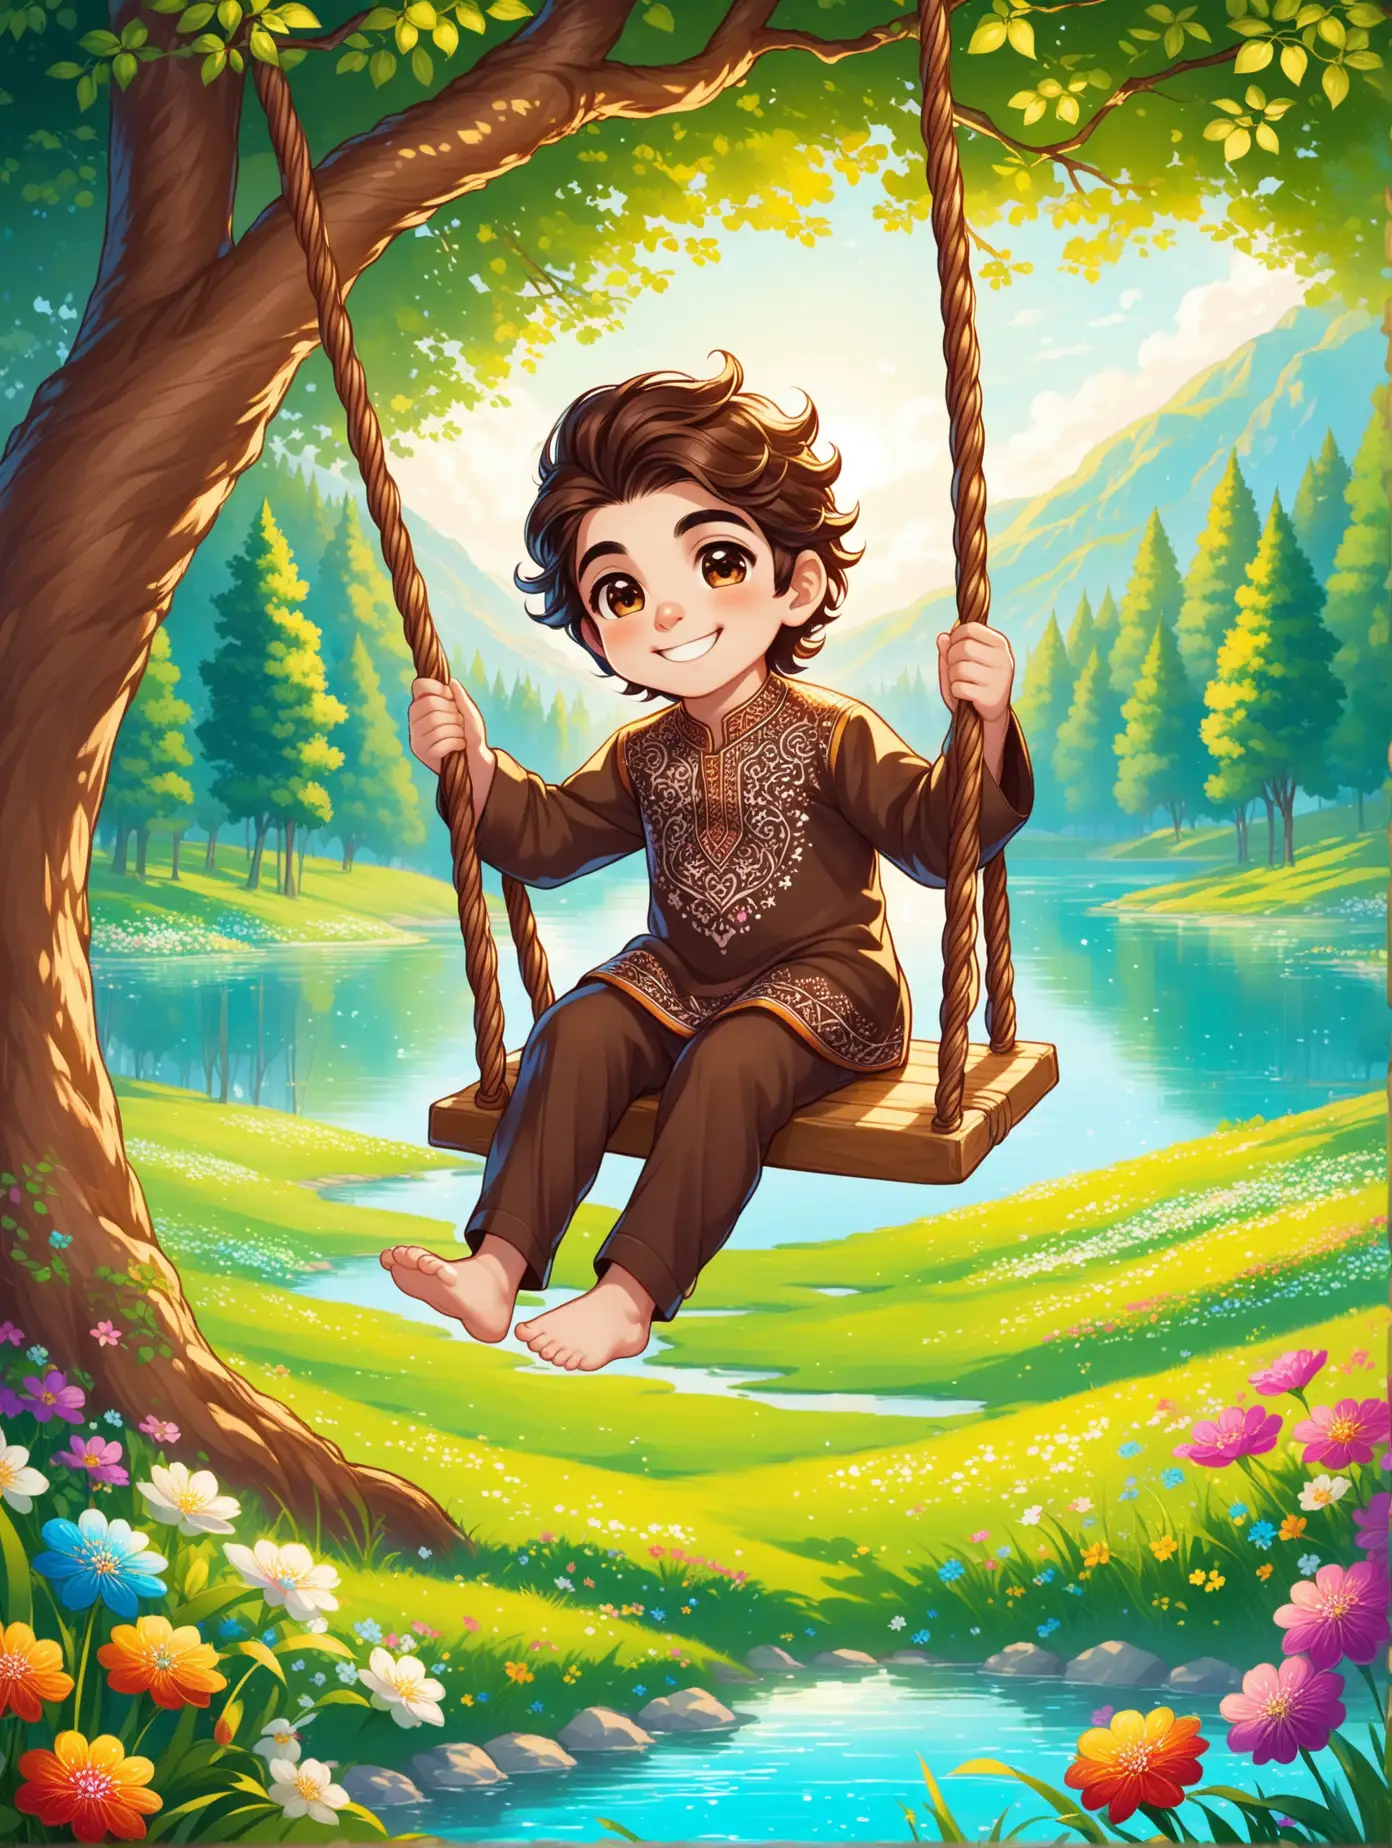 Character Persian little boy(swinging, proudly, cute, white skin, smiling, smaller eyes, bigger nose, clothes full of Persian designs, black or brown hairs, Persian face).

Atmosphere forest, grass, flowers, spring, lake.